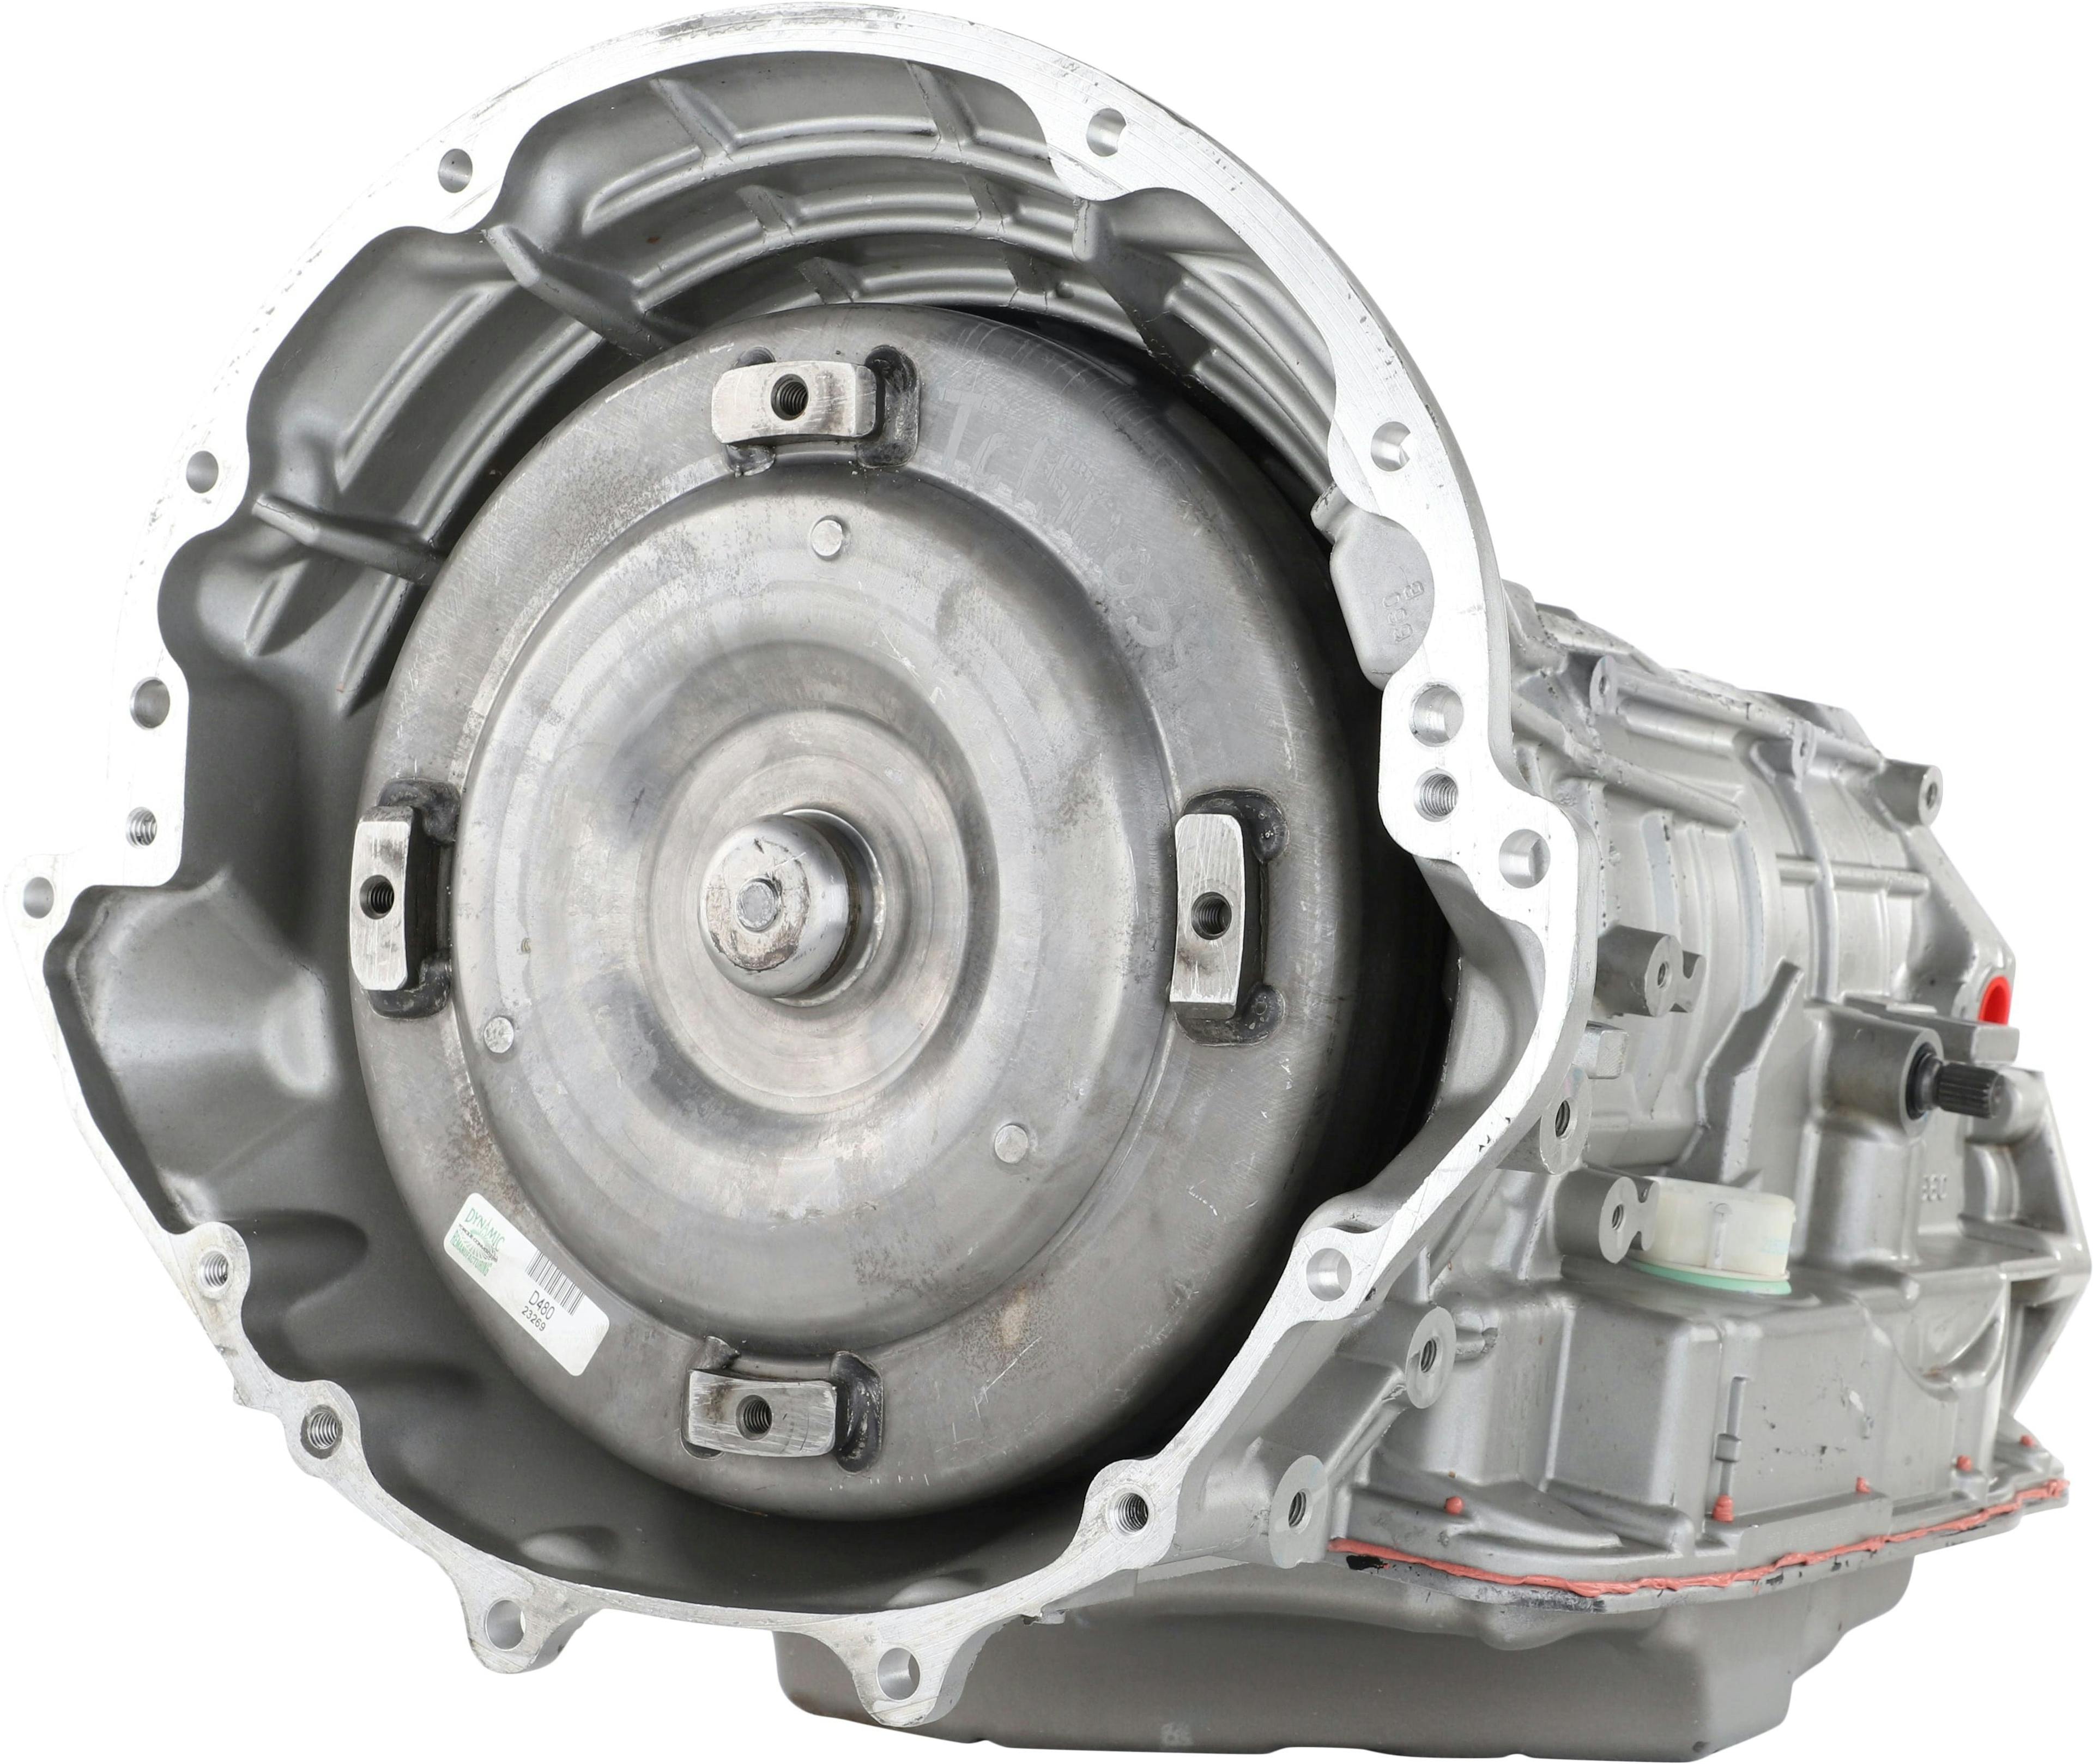 Automatic Transmission for 2012-2013 Dodge Durango/Ram 1500 and Jeep Grand Cherokee RWD with 4.7/5.7L V8 Engine